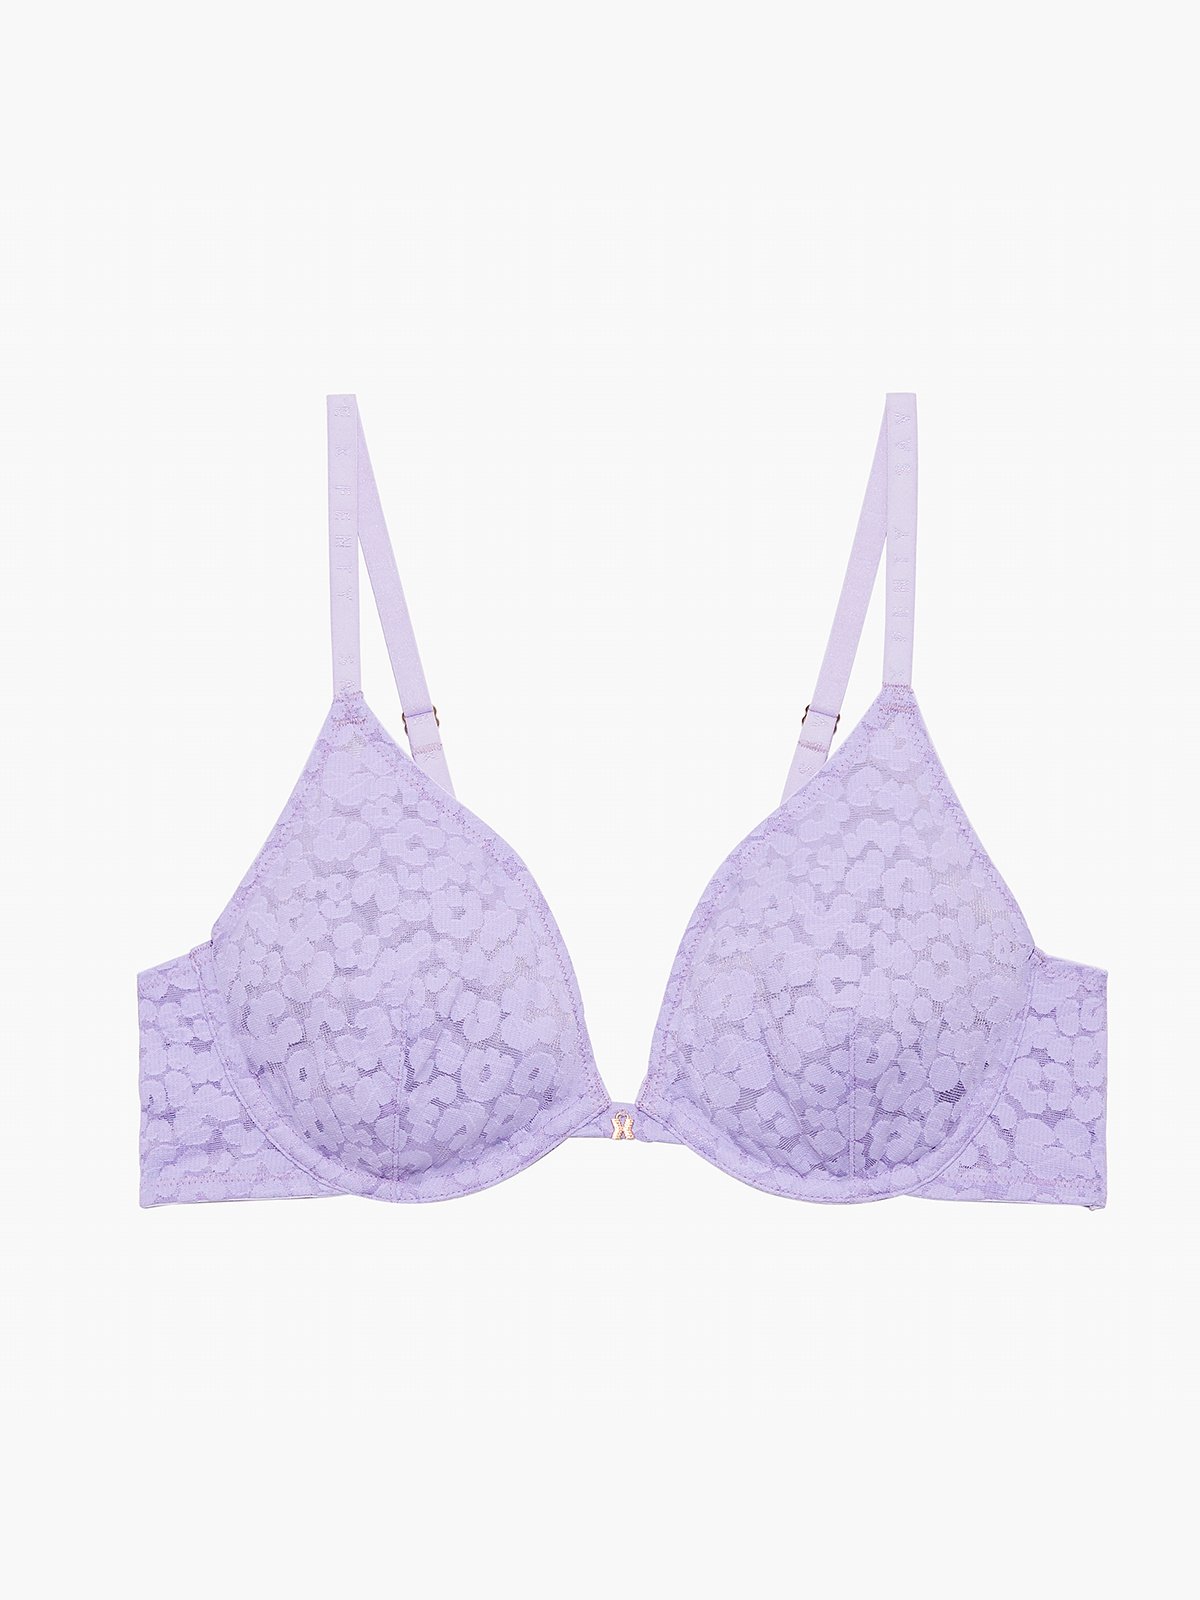 SAVAGE X FENTY unicorn lavender pink Floral Lace and Mesh bralette 2X NEW